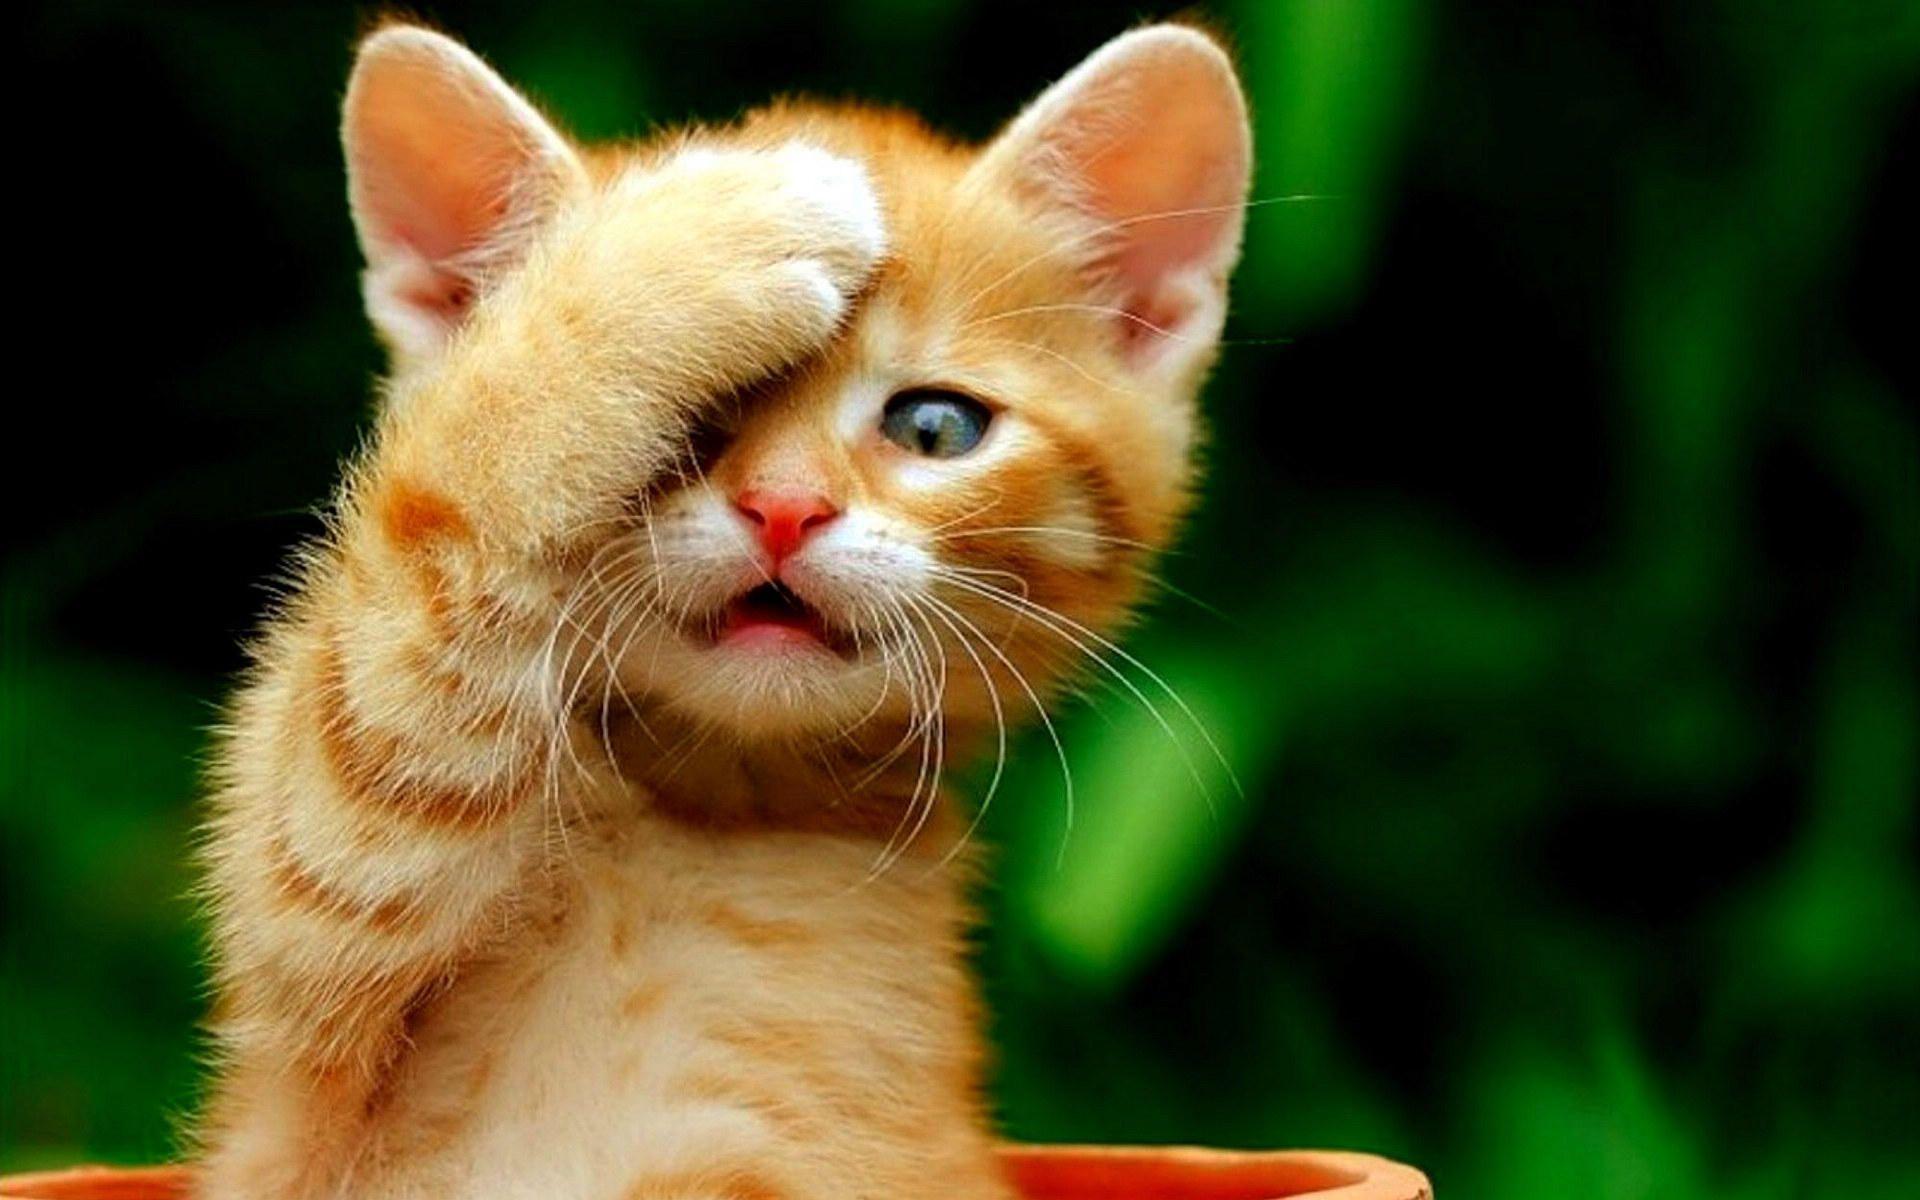 Cute Cat Image HD Wallpaper Picture Wallpictinfo 1920x1200PX